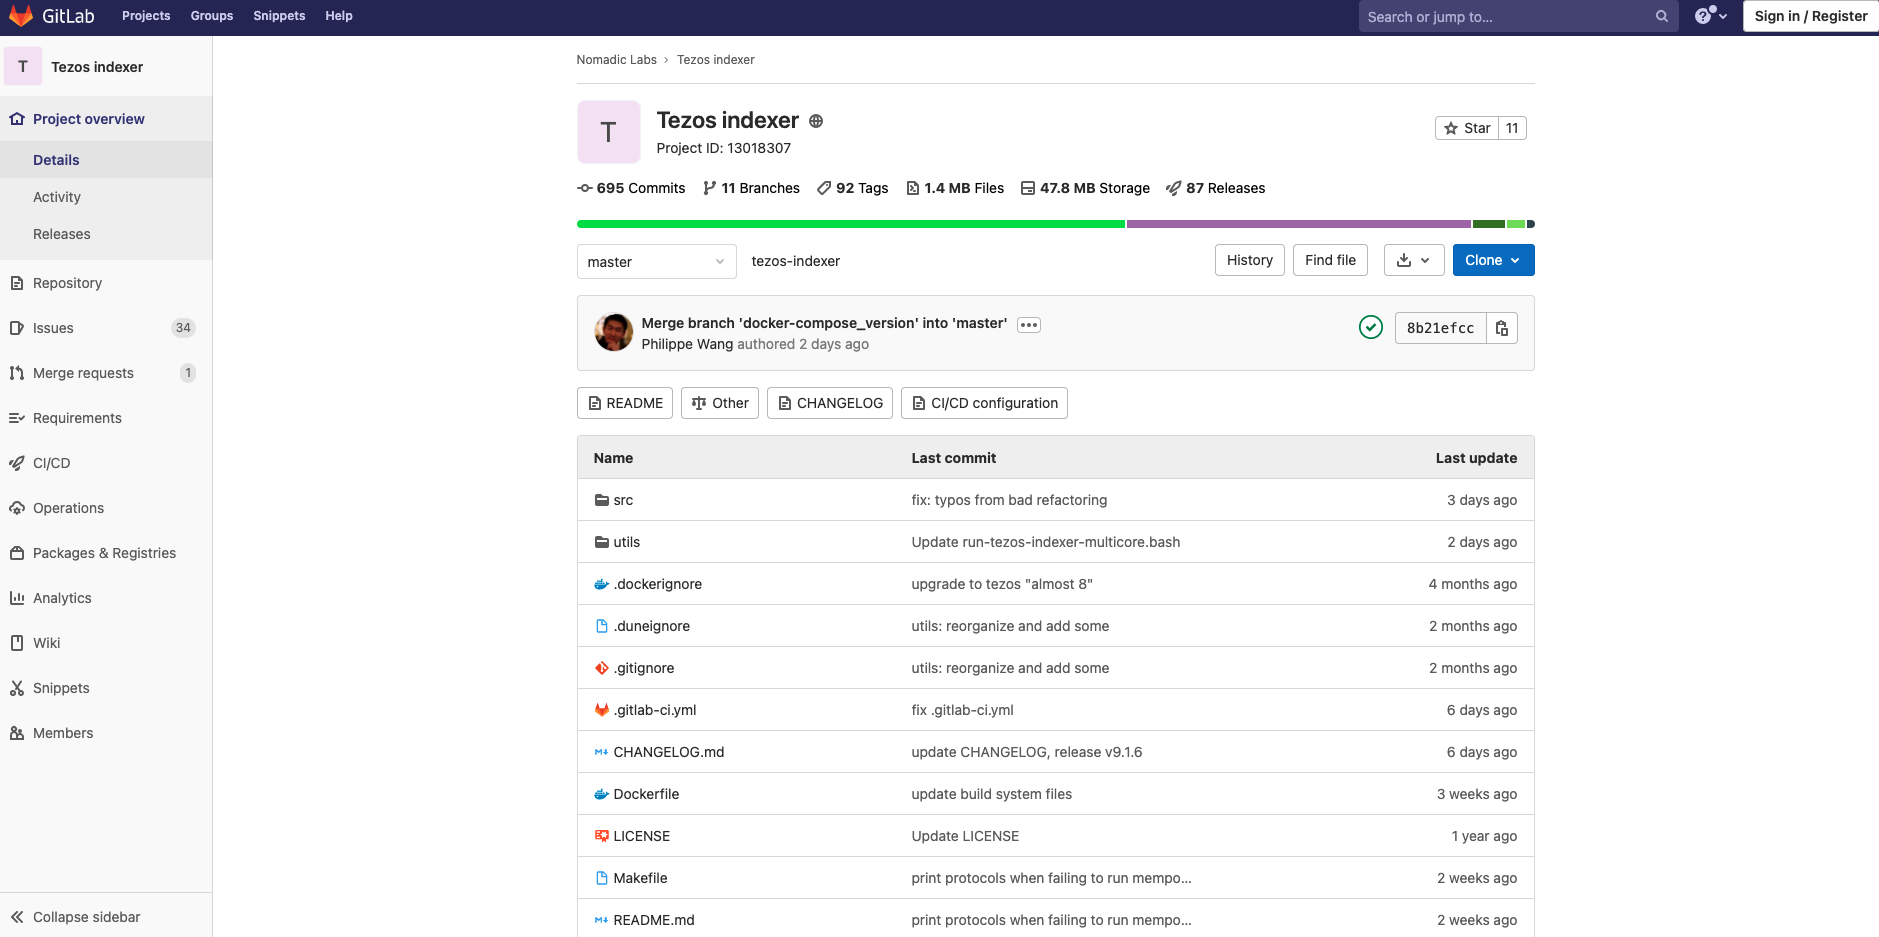 Gitlab page of the Tezos explorer by Nomadic Labs